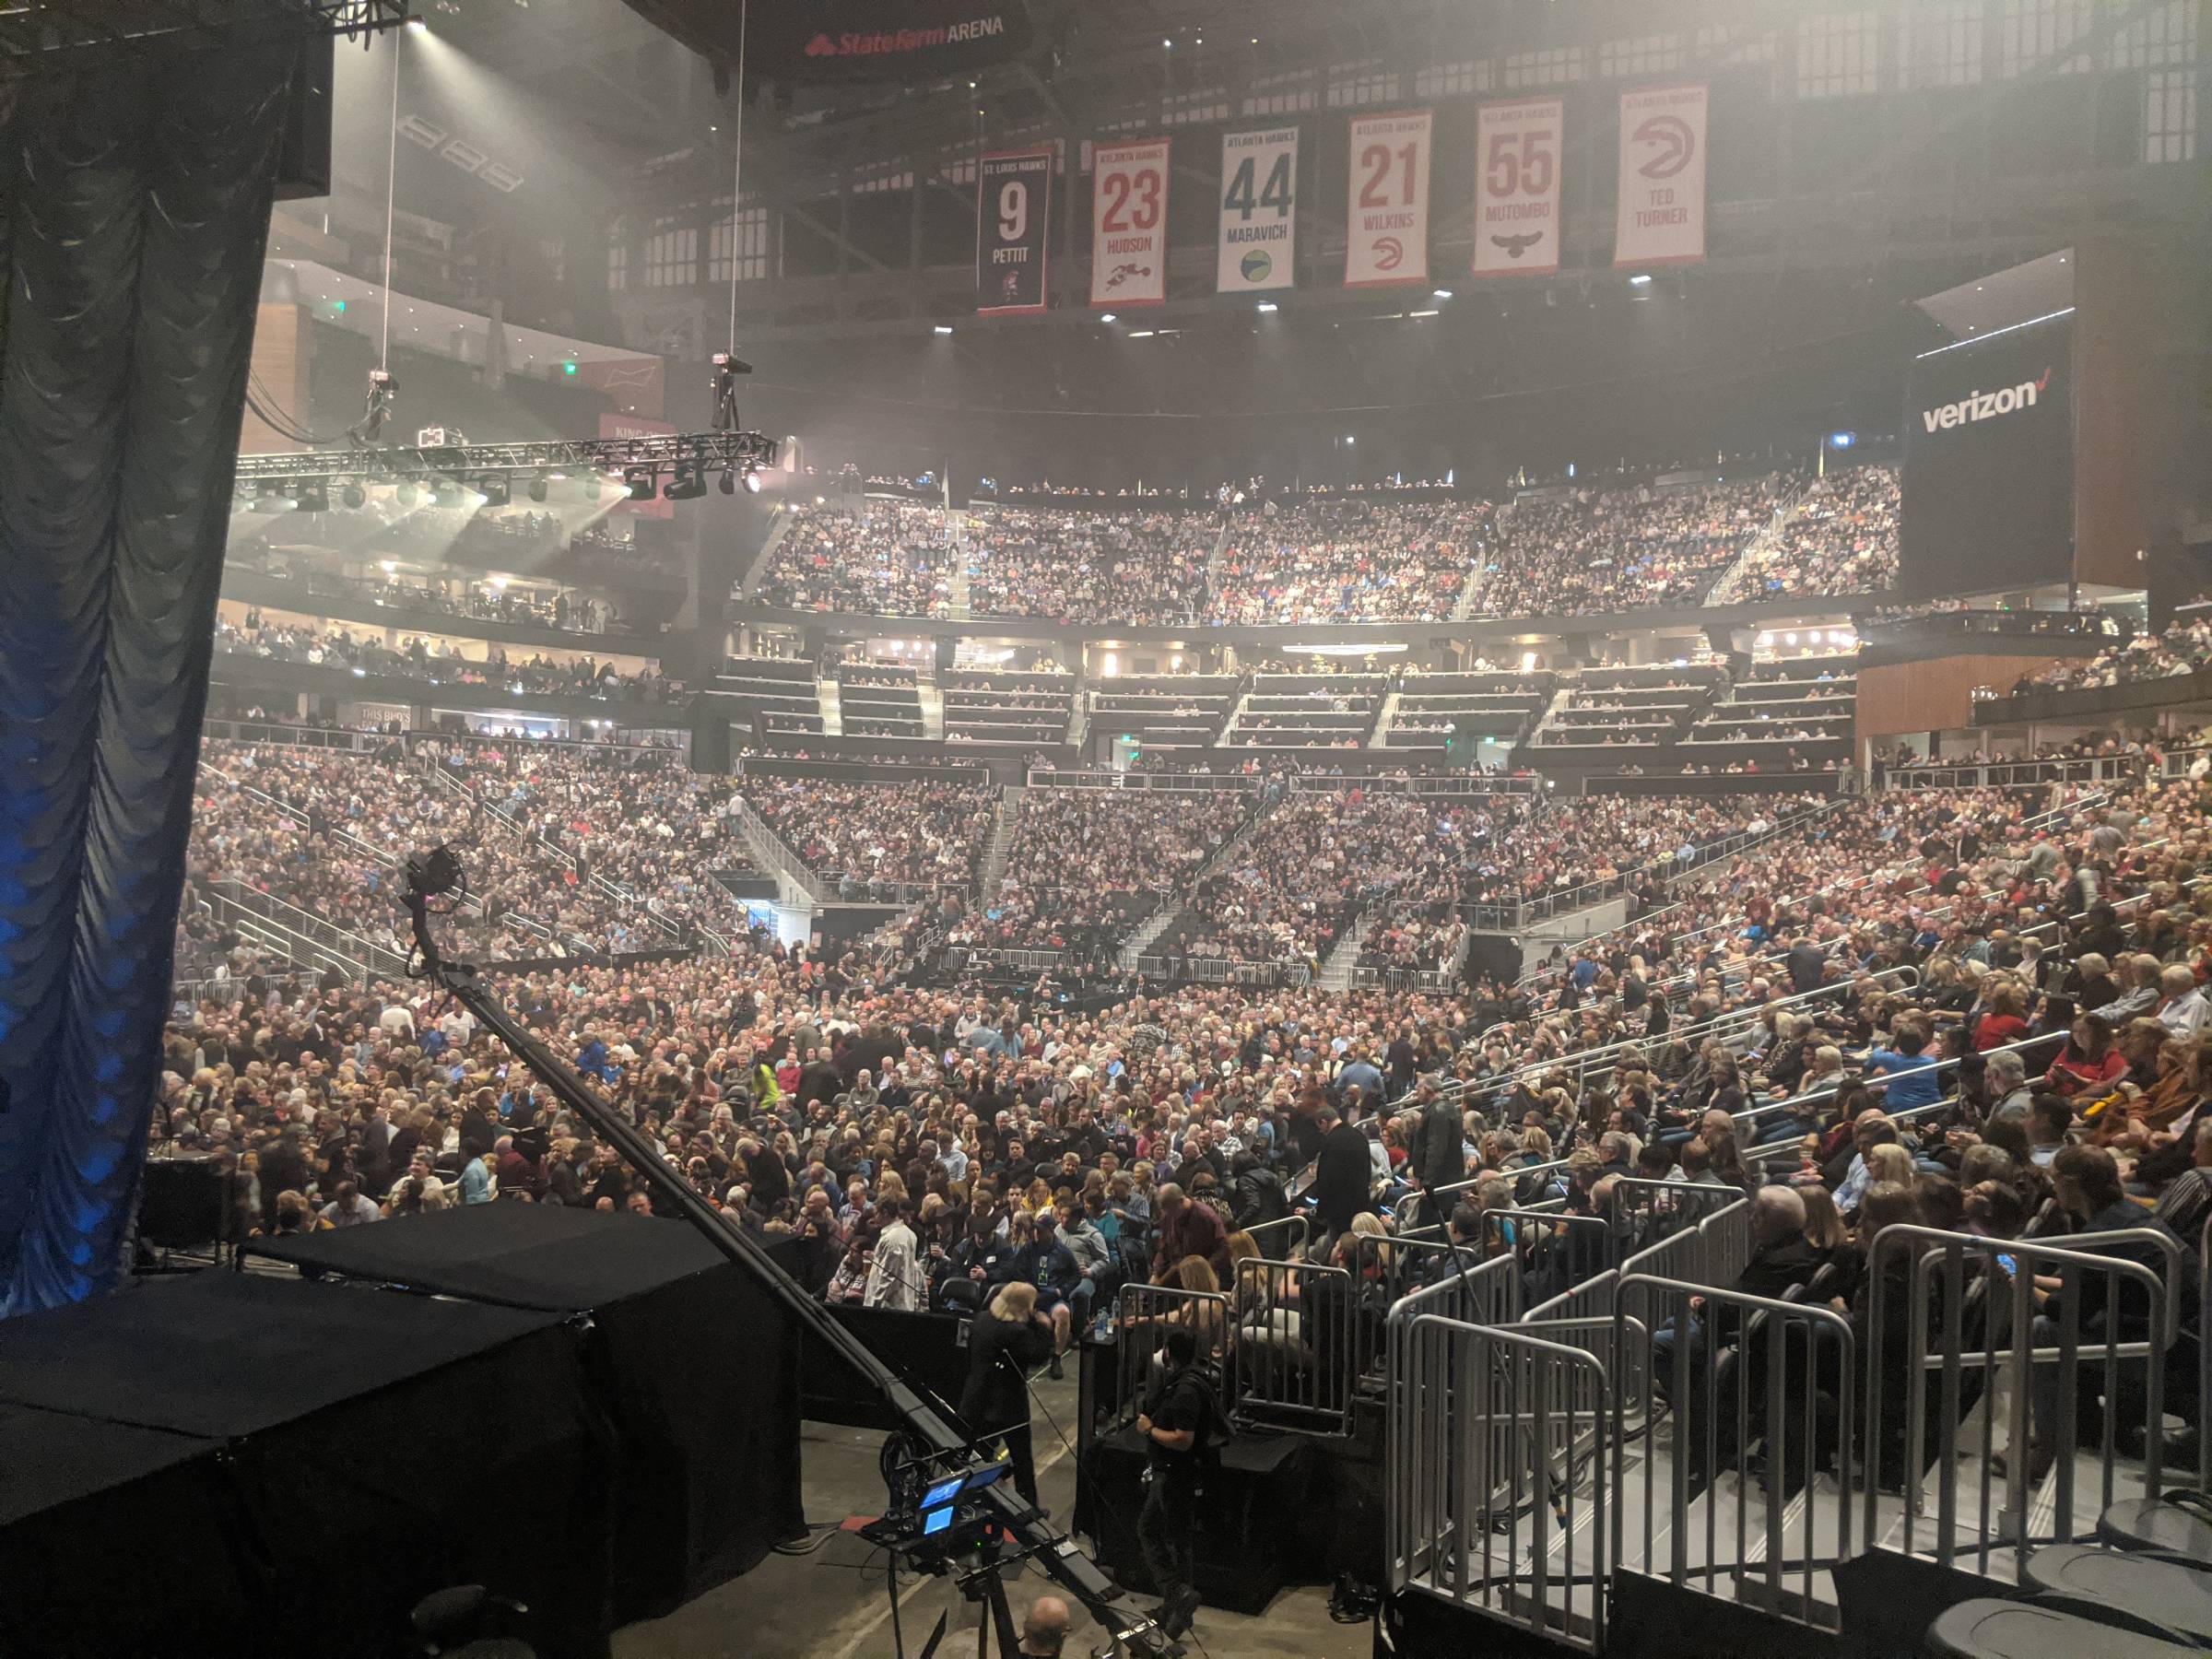 sold out State Farm Arena